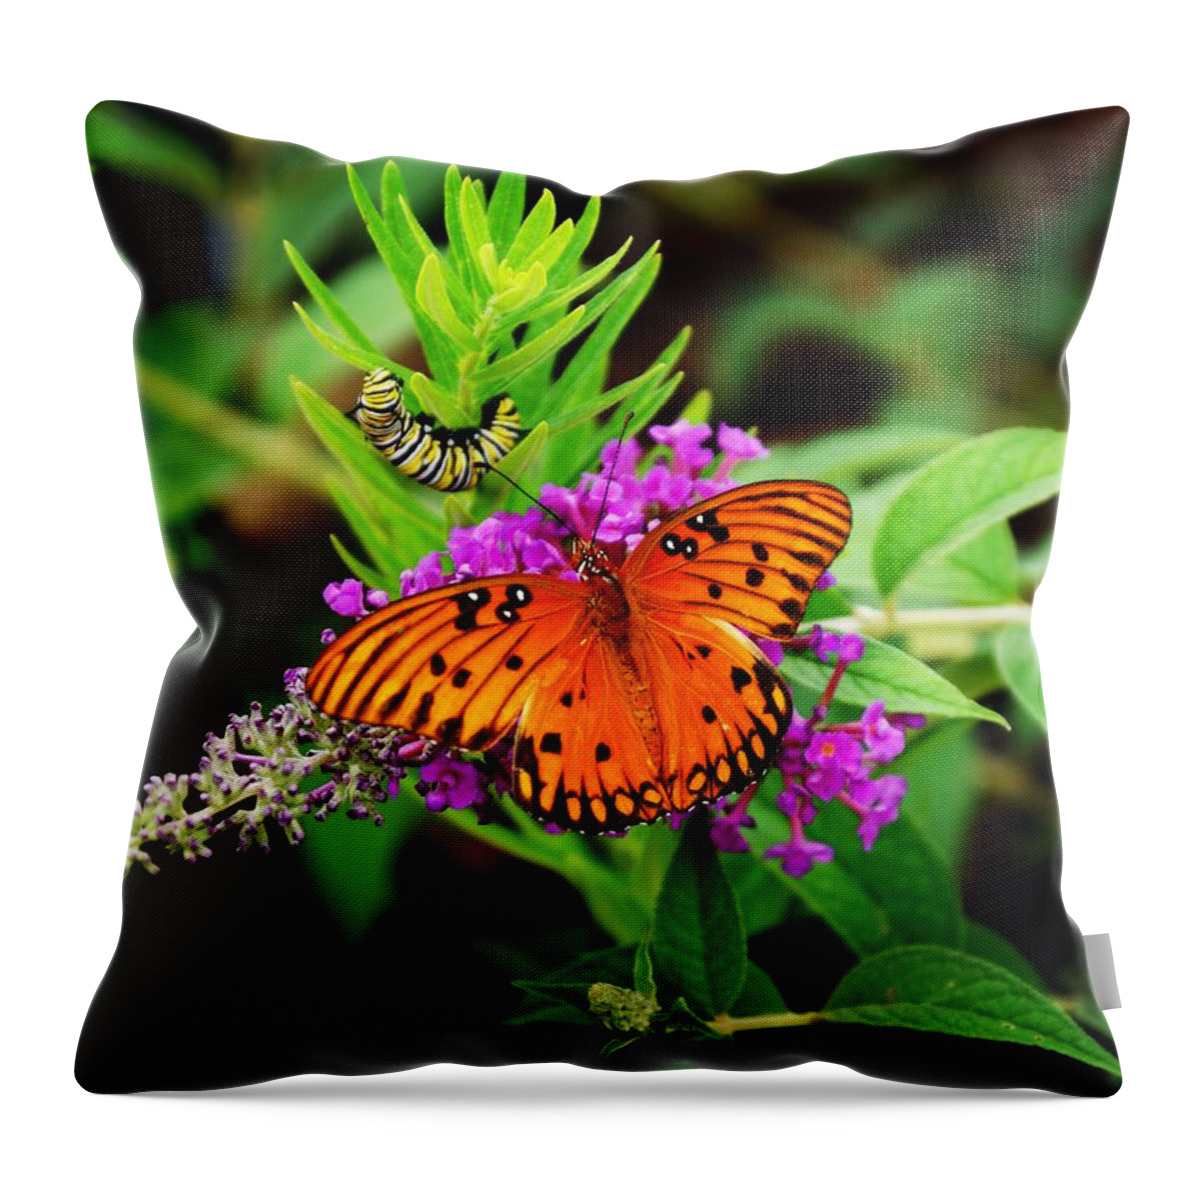  Throw Pillow featuring the photograph Transformation by Rodney Lee Williams